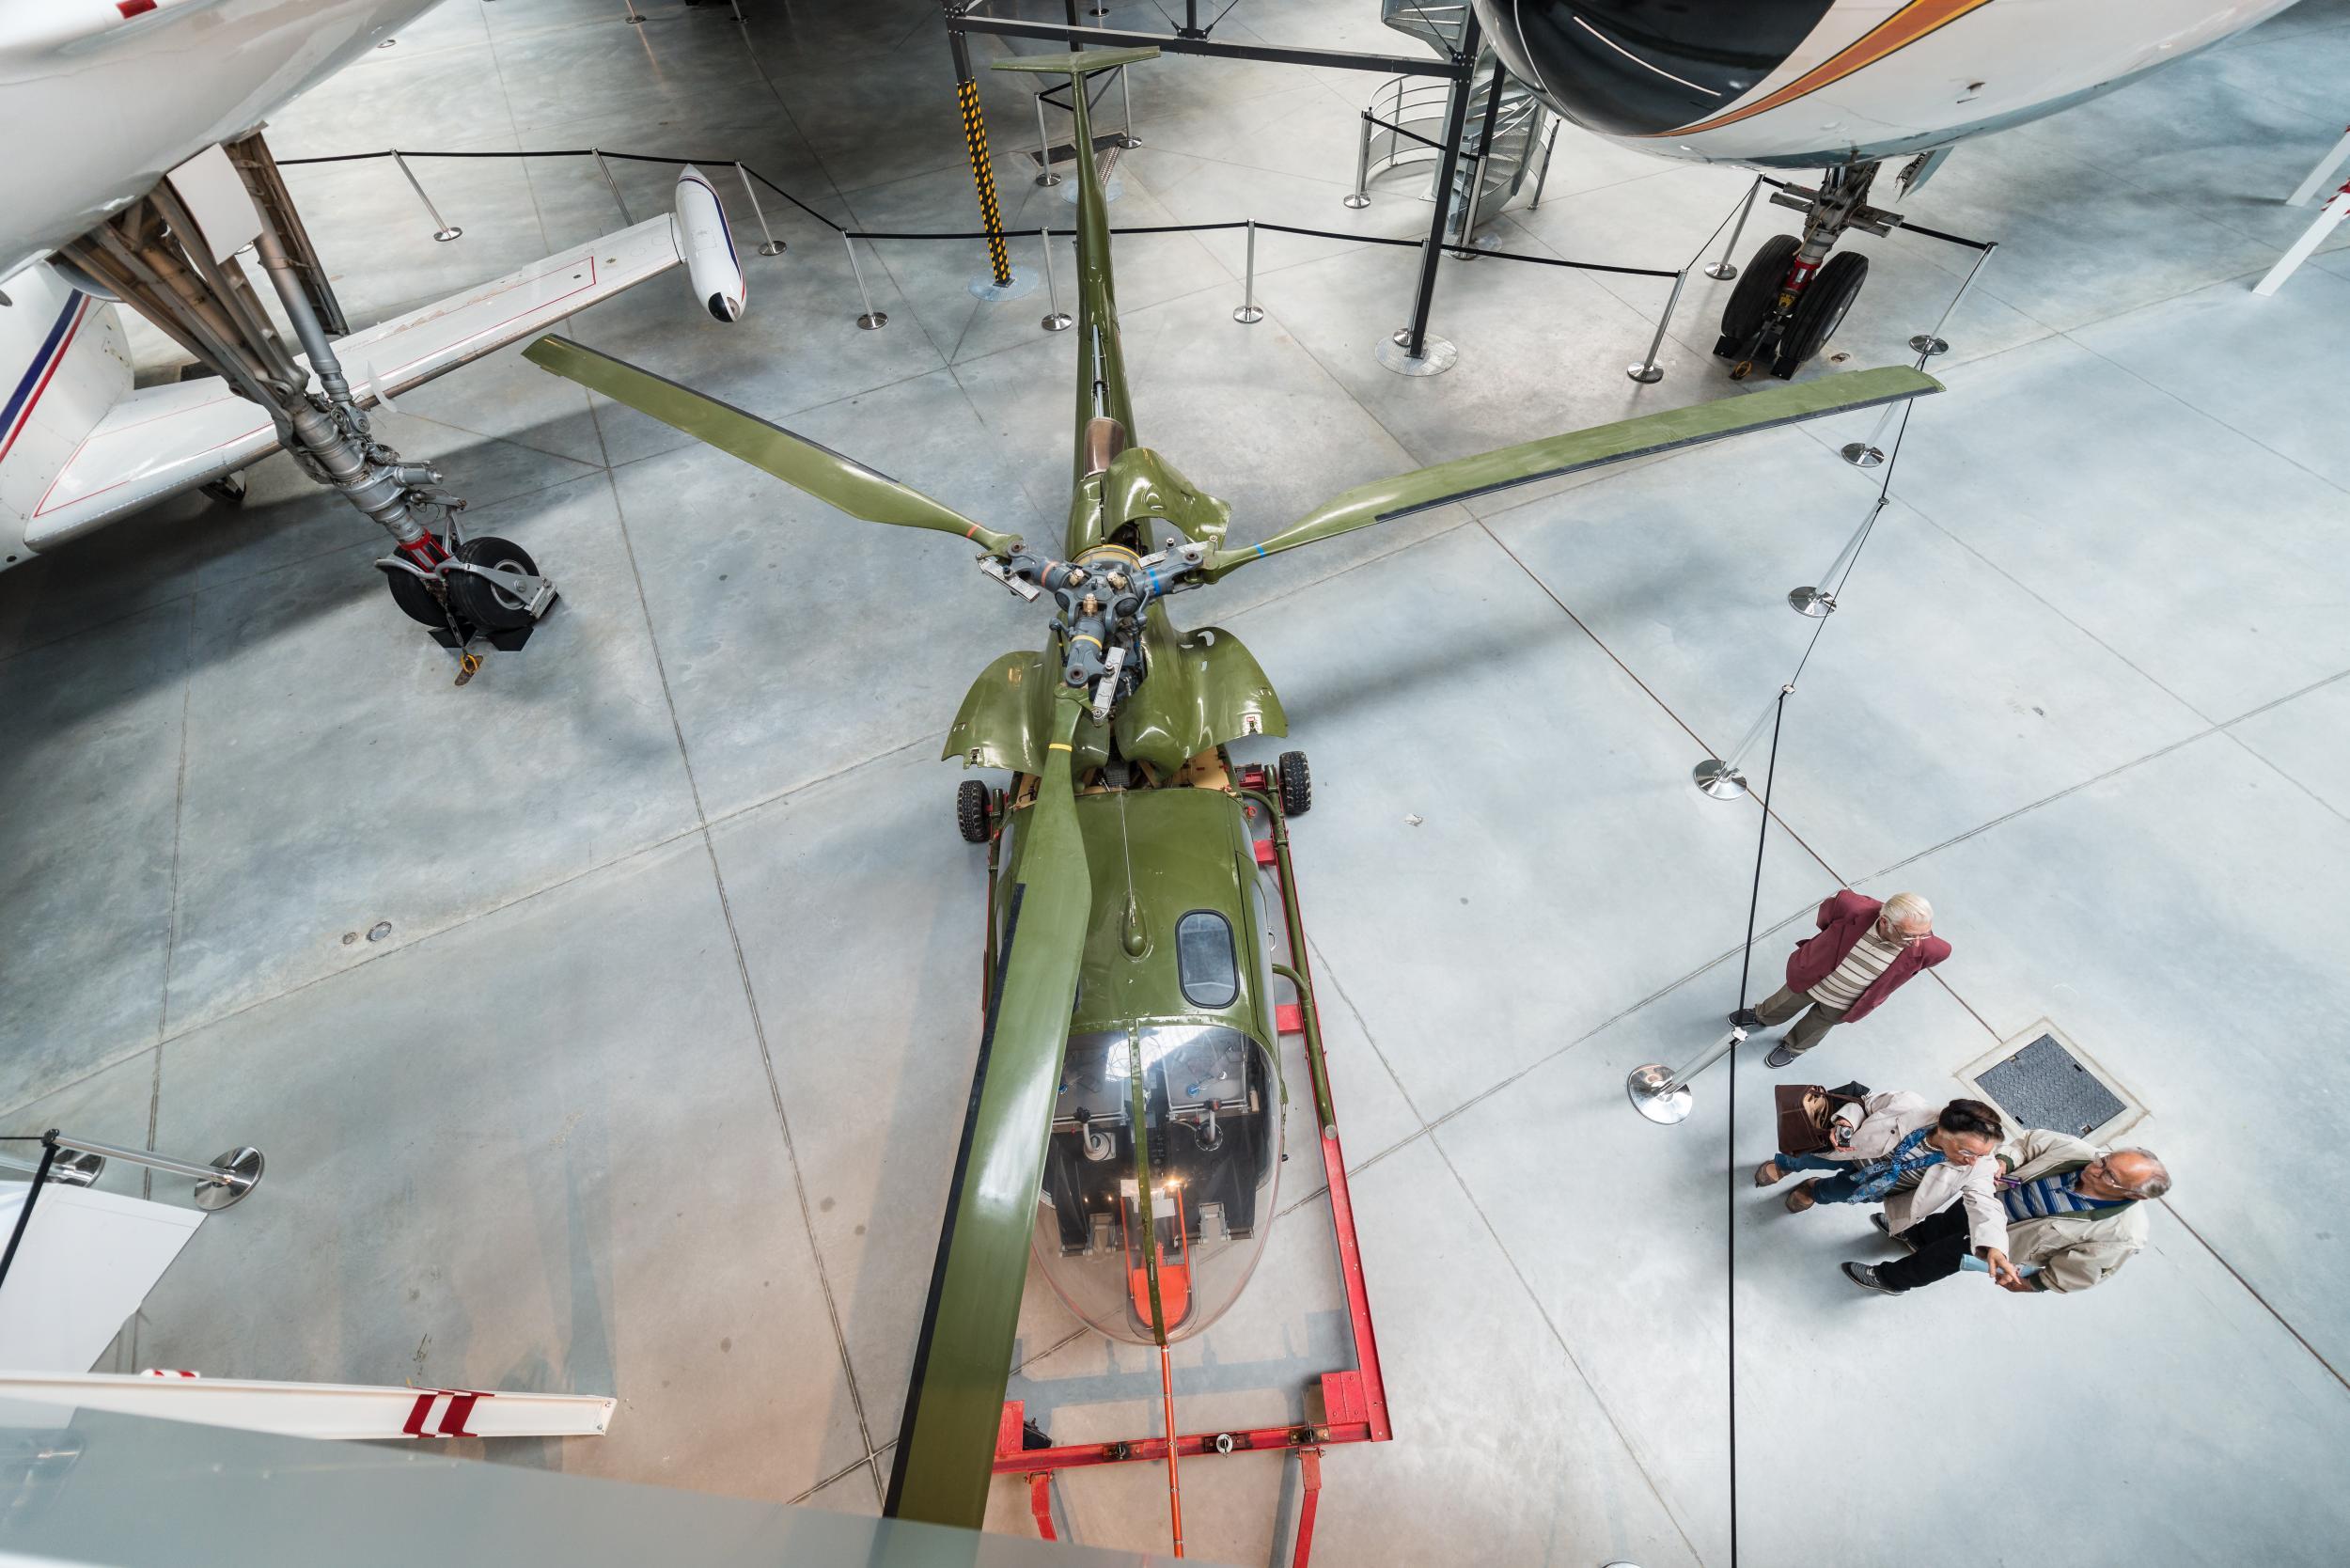 The museum features helicopters as well planes